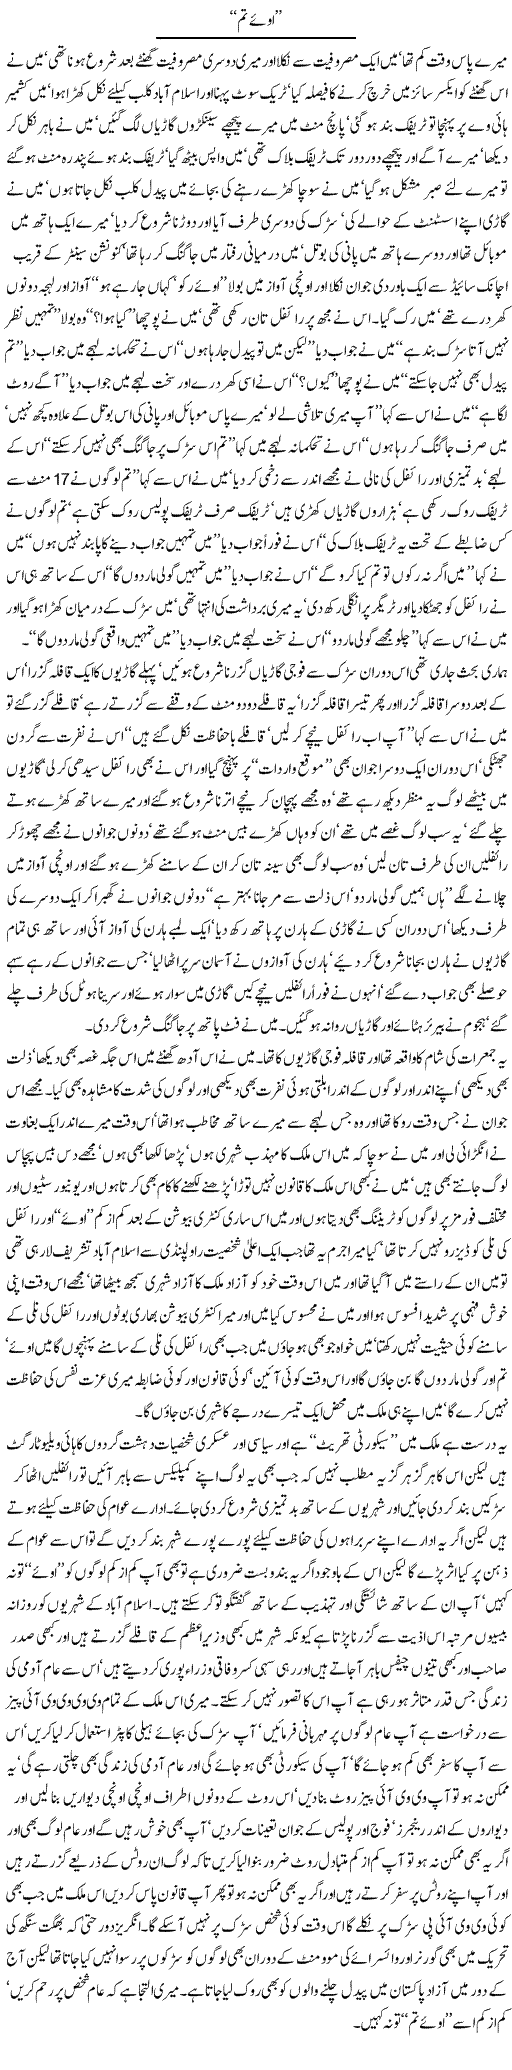 My Journey Express Column Javed Chaudhry 9 October 2011